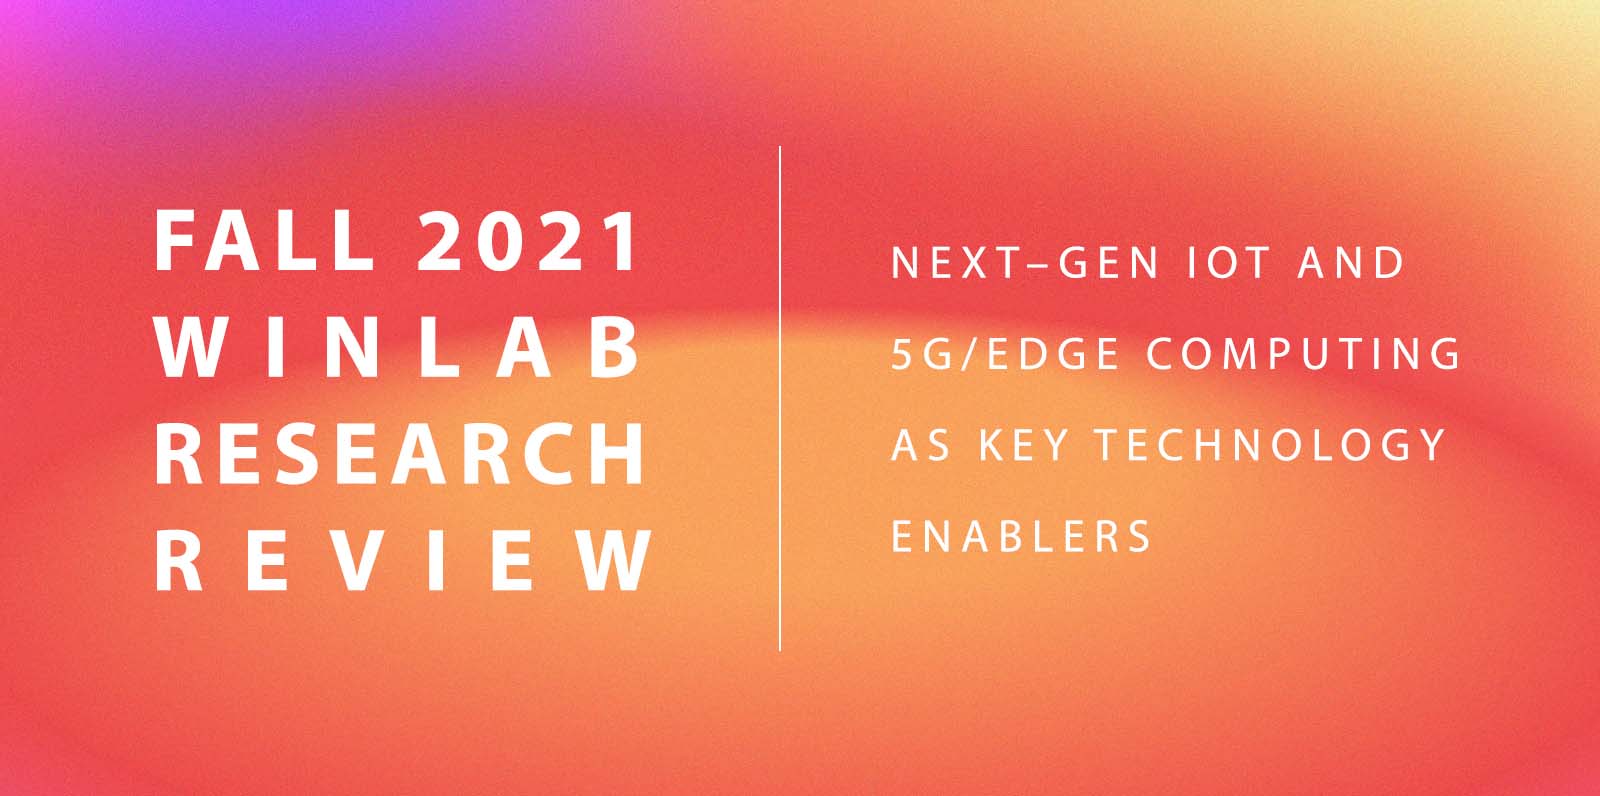 Fall 2021 WINLAB Research Review